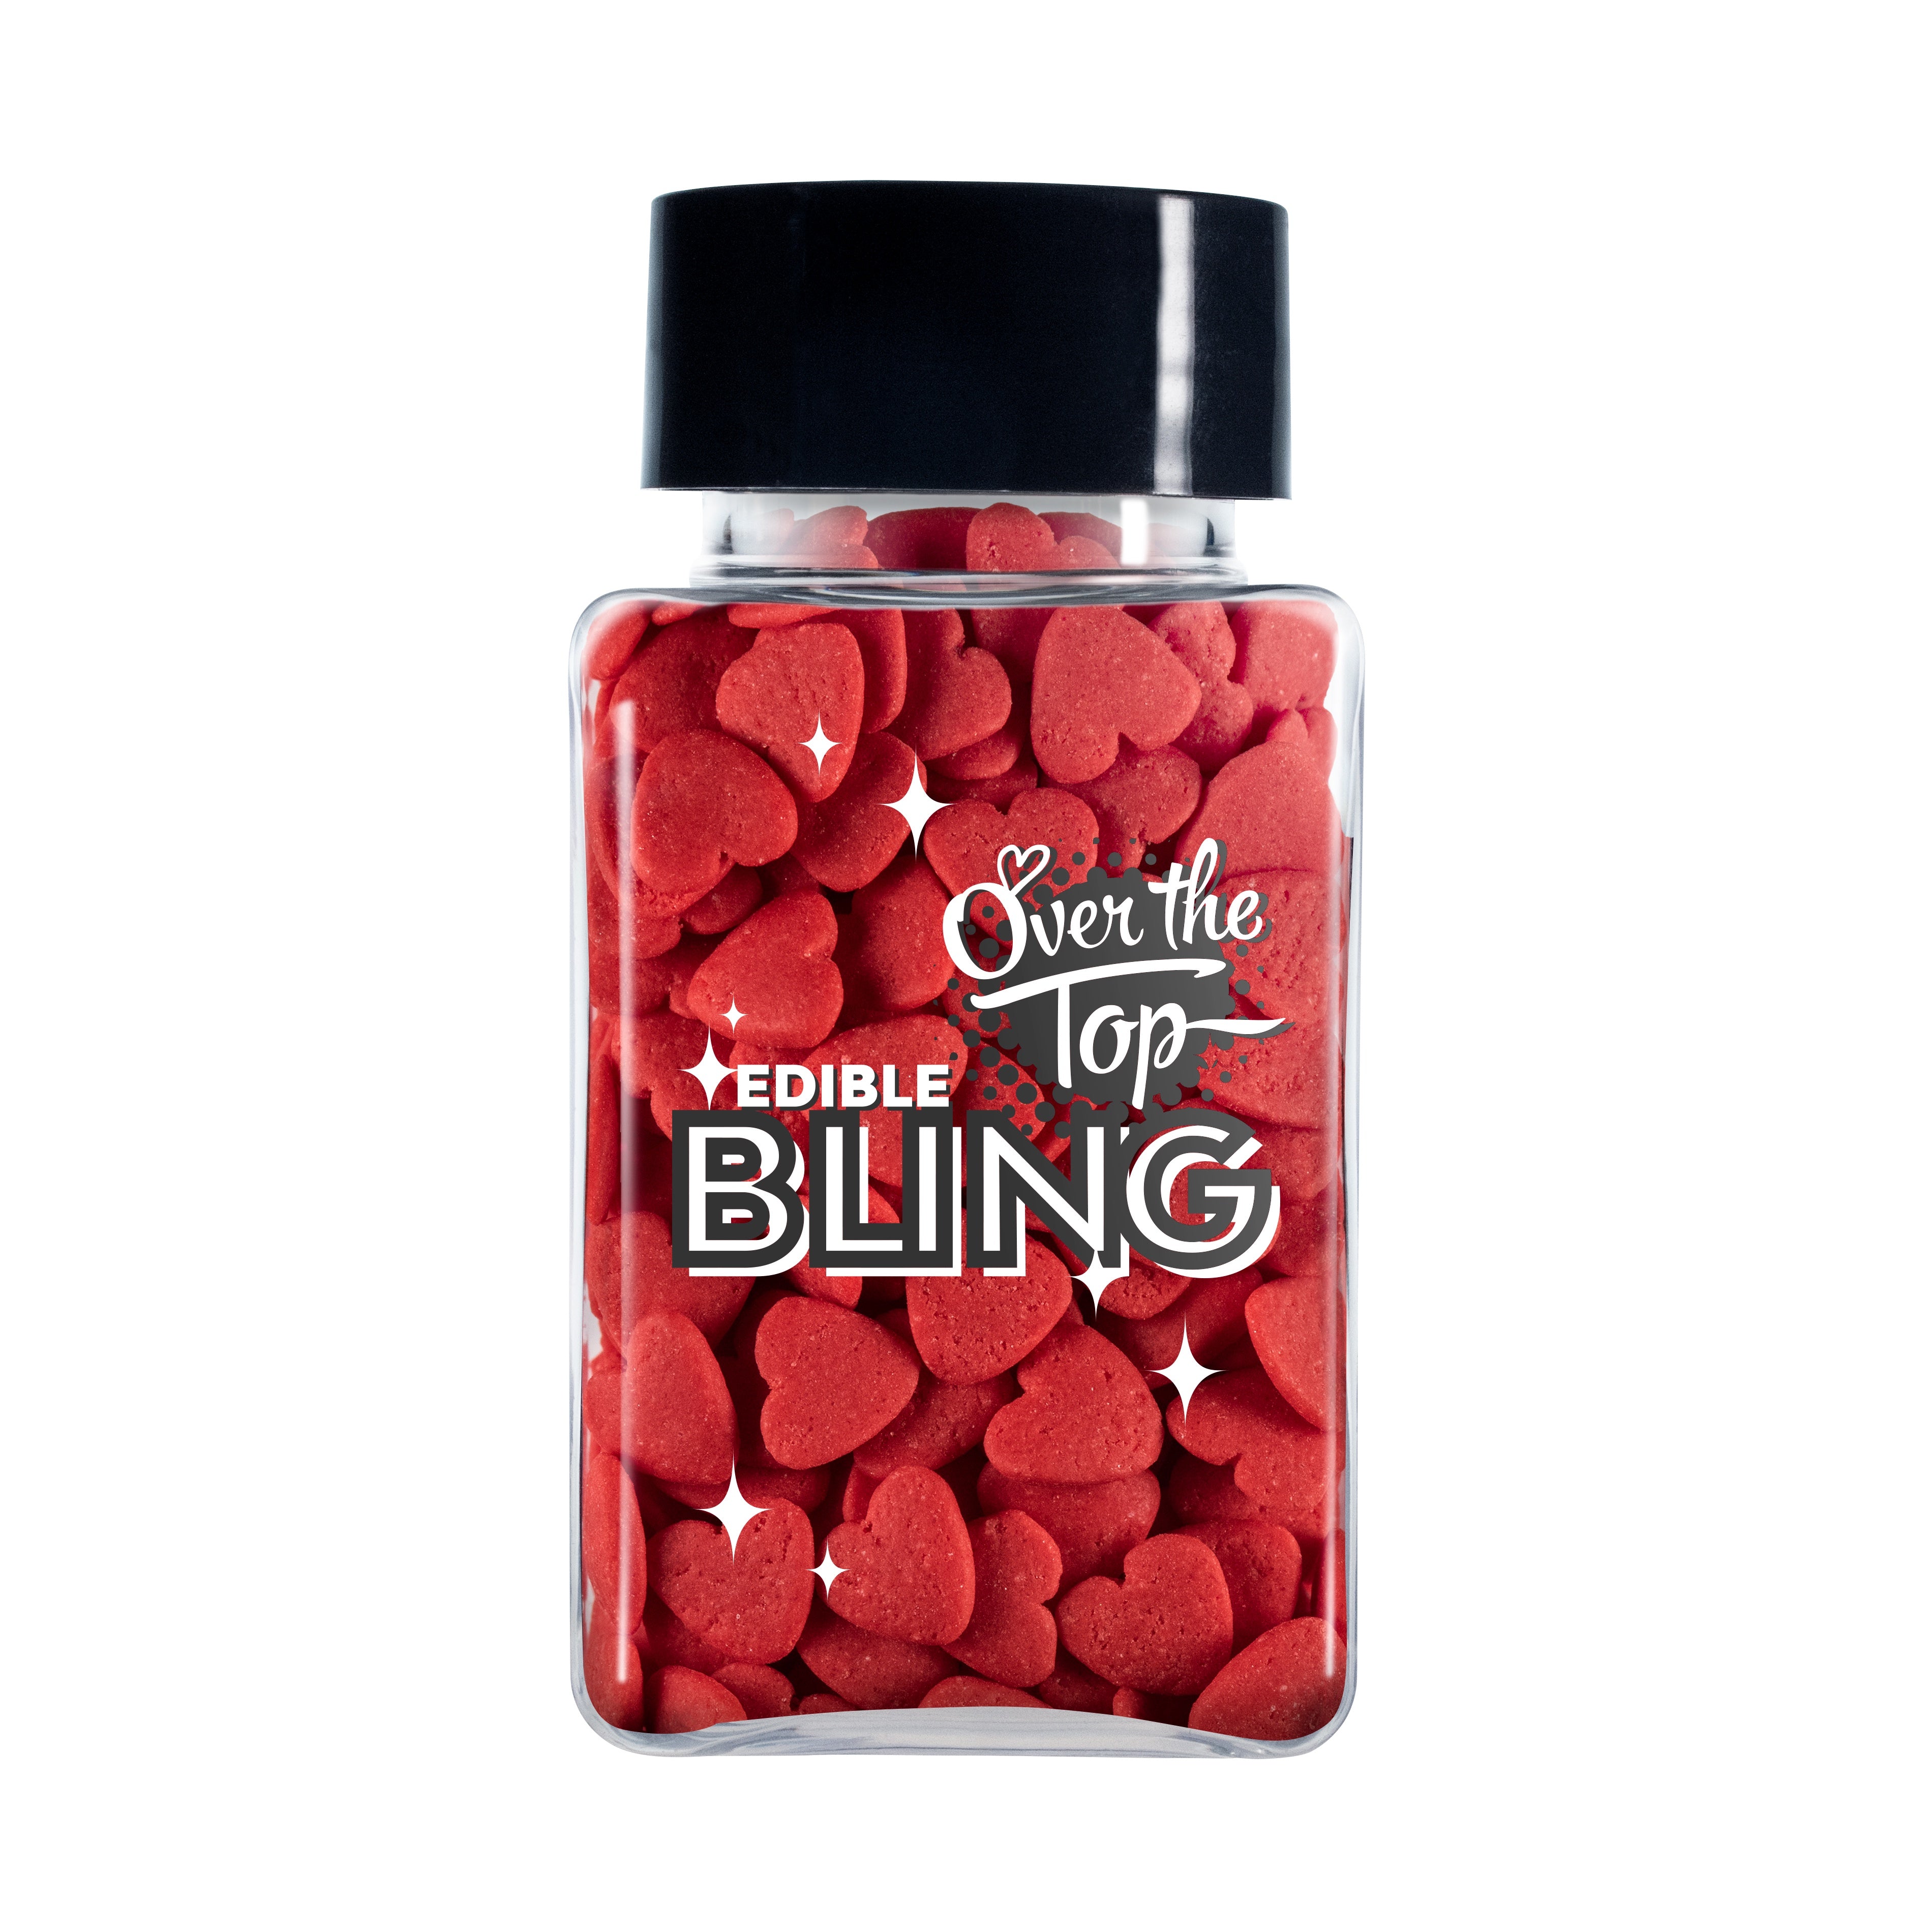 Over The Top Edible Bling Sprinkles - Love Hearts Red 55g